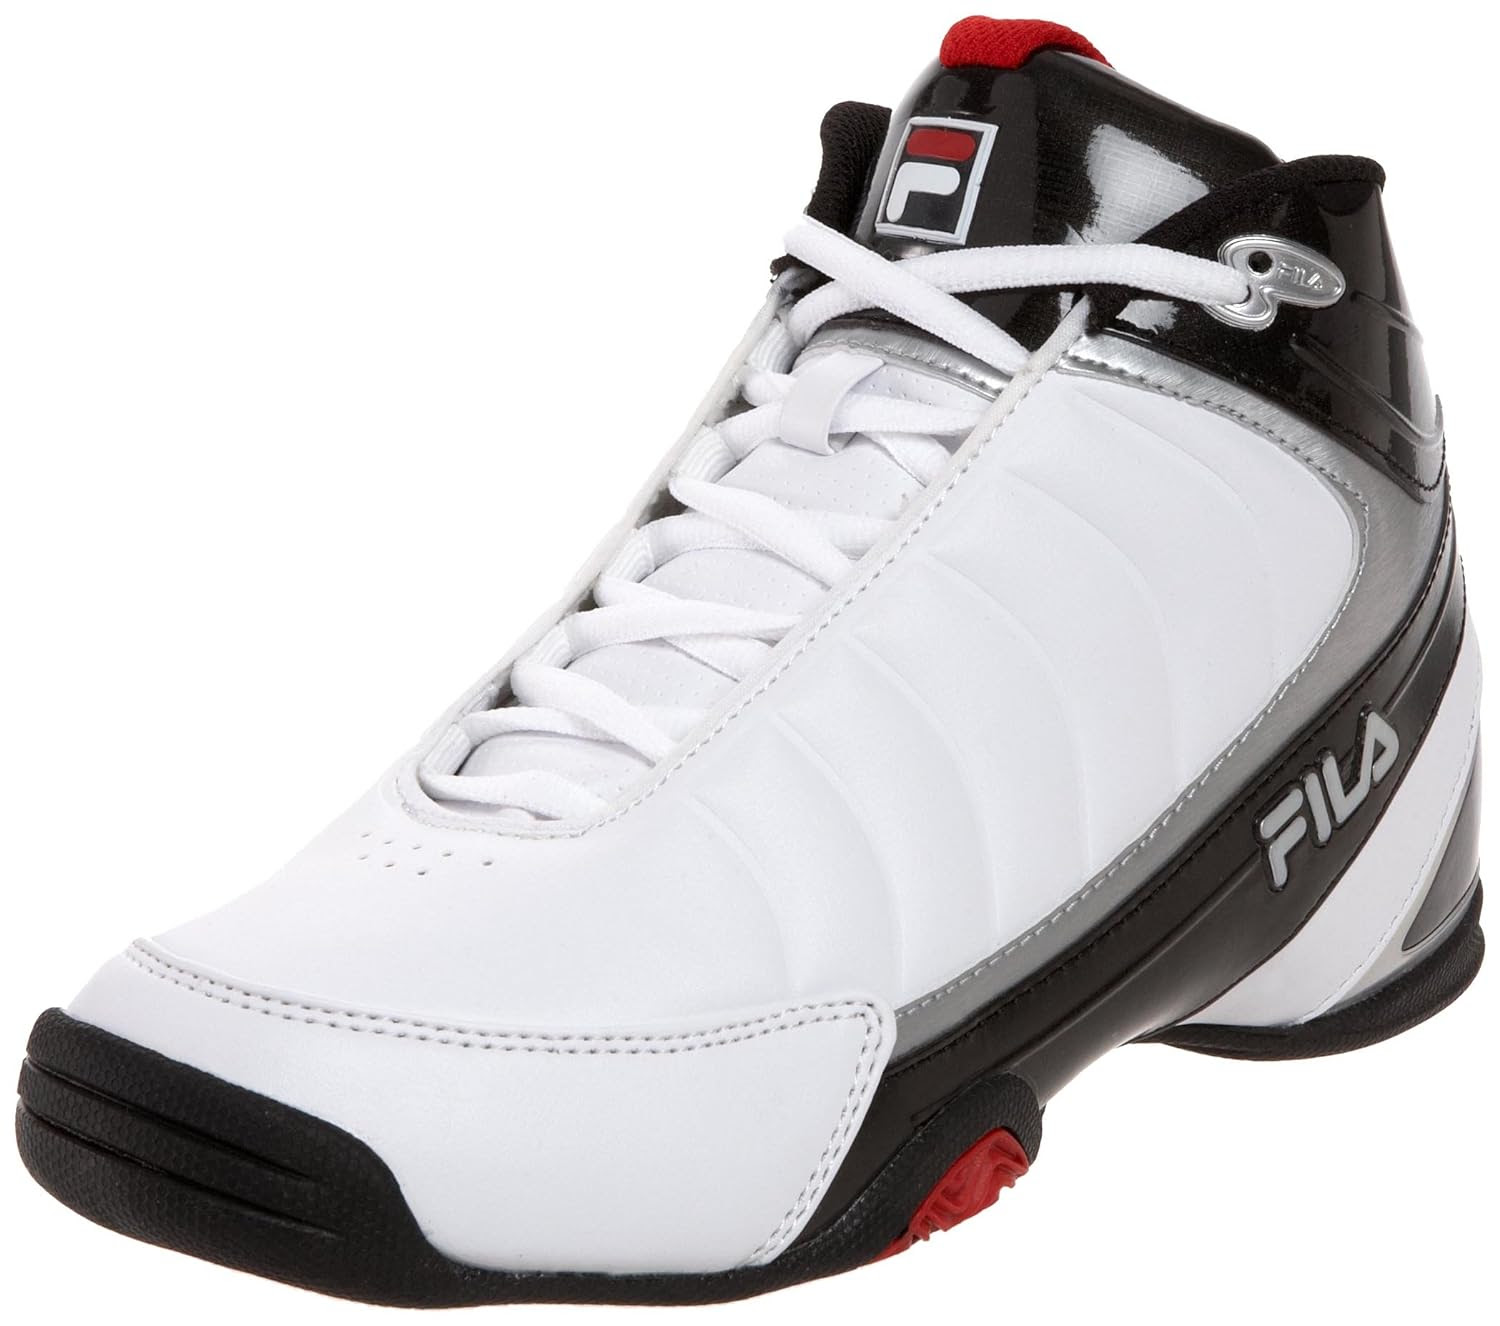  Fila  Men s  DLS Game White Sports Shoes  Basketball  Shoes  